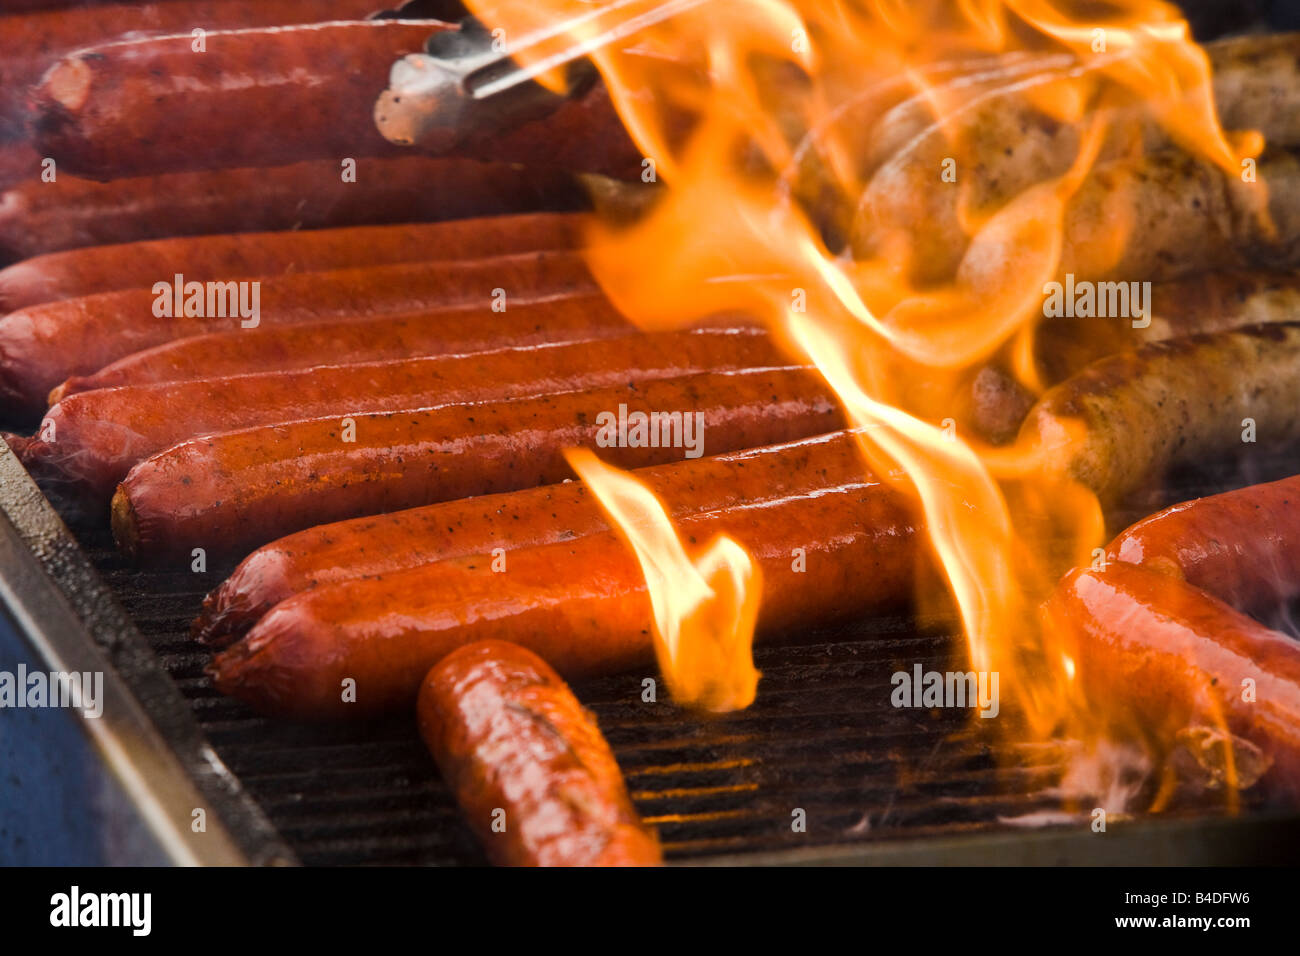 Hotdogs being cooked by a vendor at the Abbott Kinney Festival Venice Los Angeles County California United States of America Stock Photo